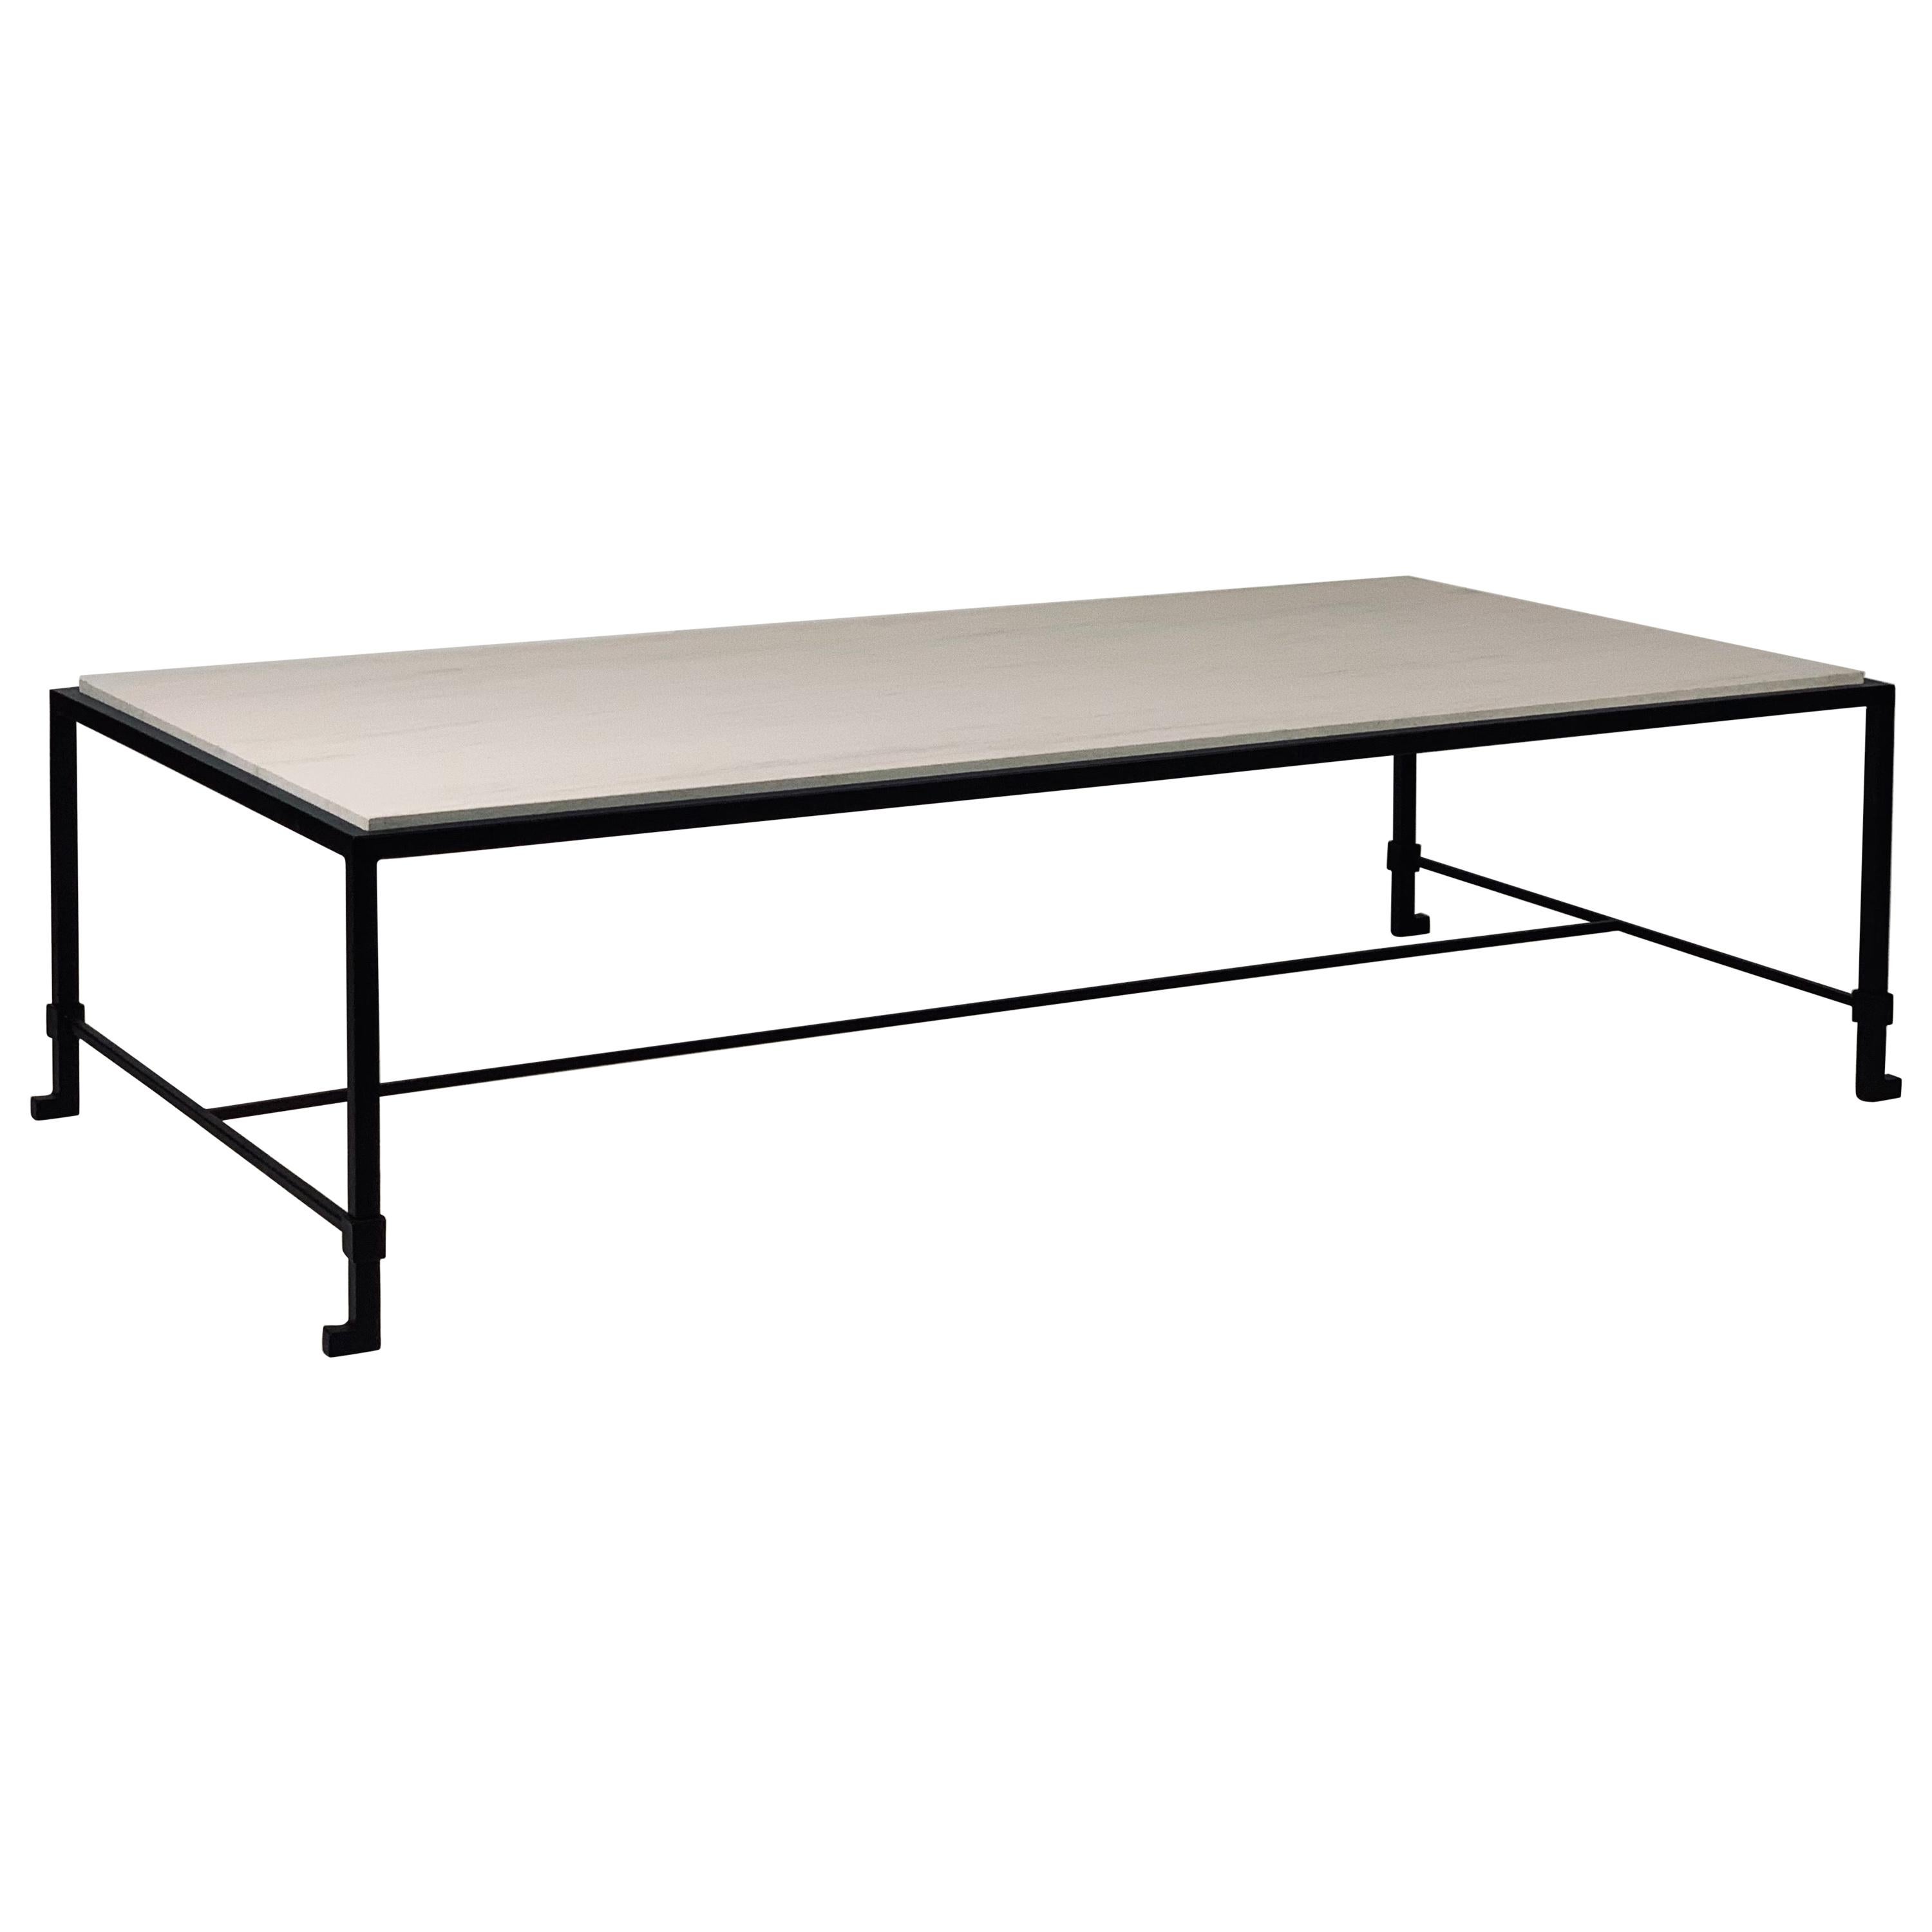 Chic Large 'Diagramme' Limestone Coffee Table by Design Frères For Sale